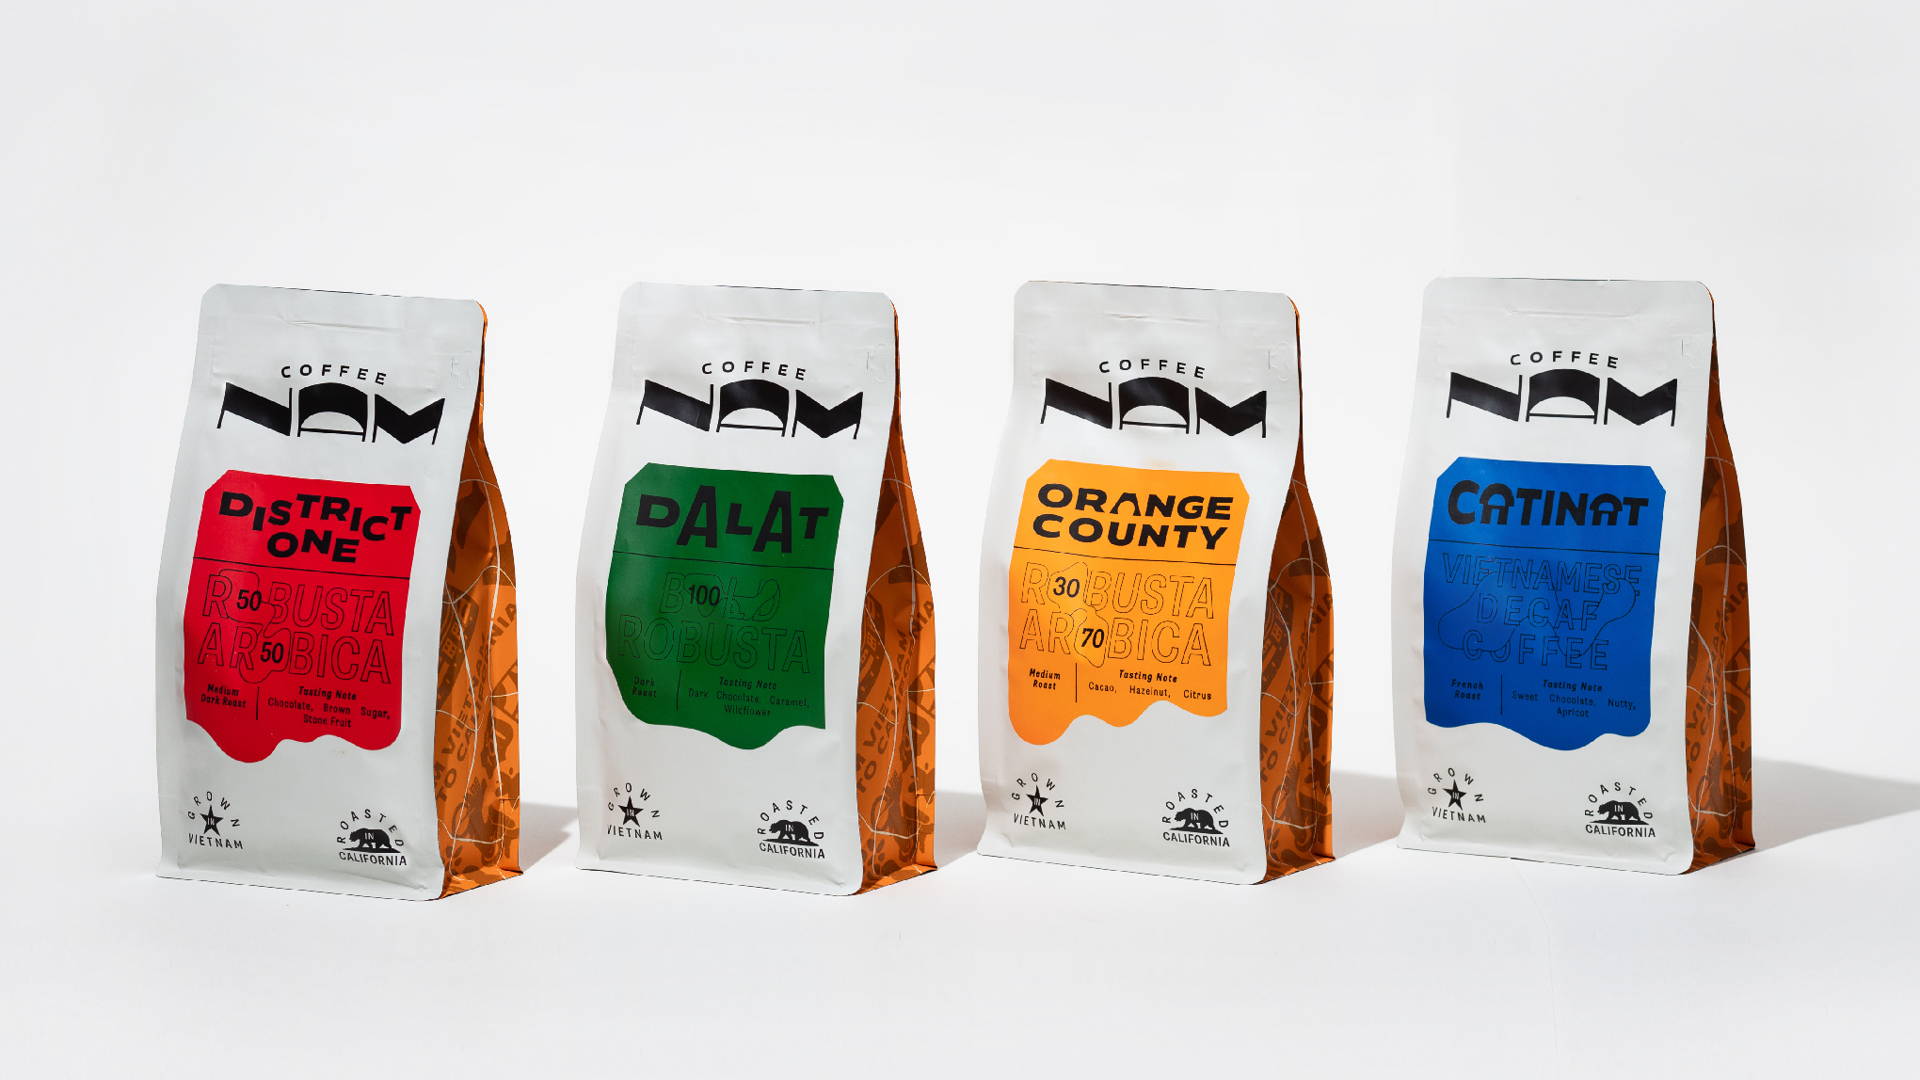 Featured image for NAM Coffee's Asymmetrical Yet Balanced Coffee Bags Blends Two Cultures Through Design